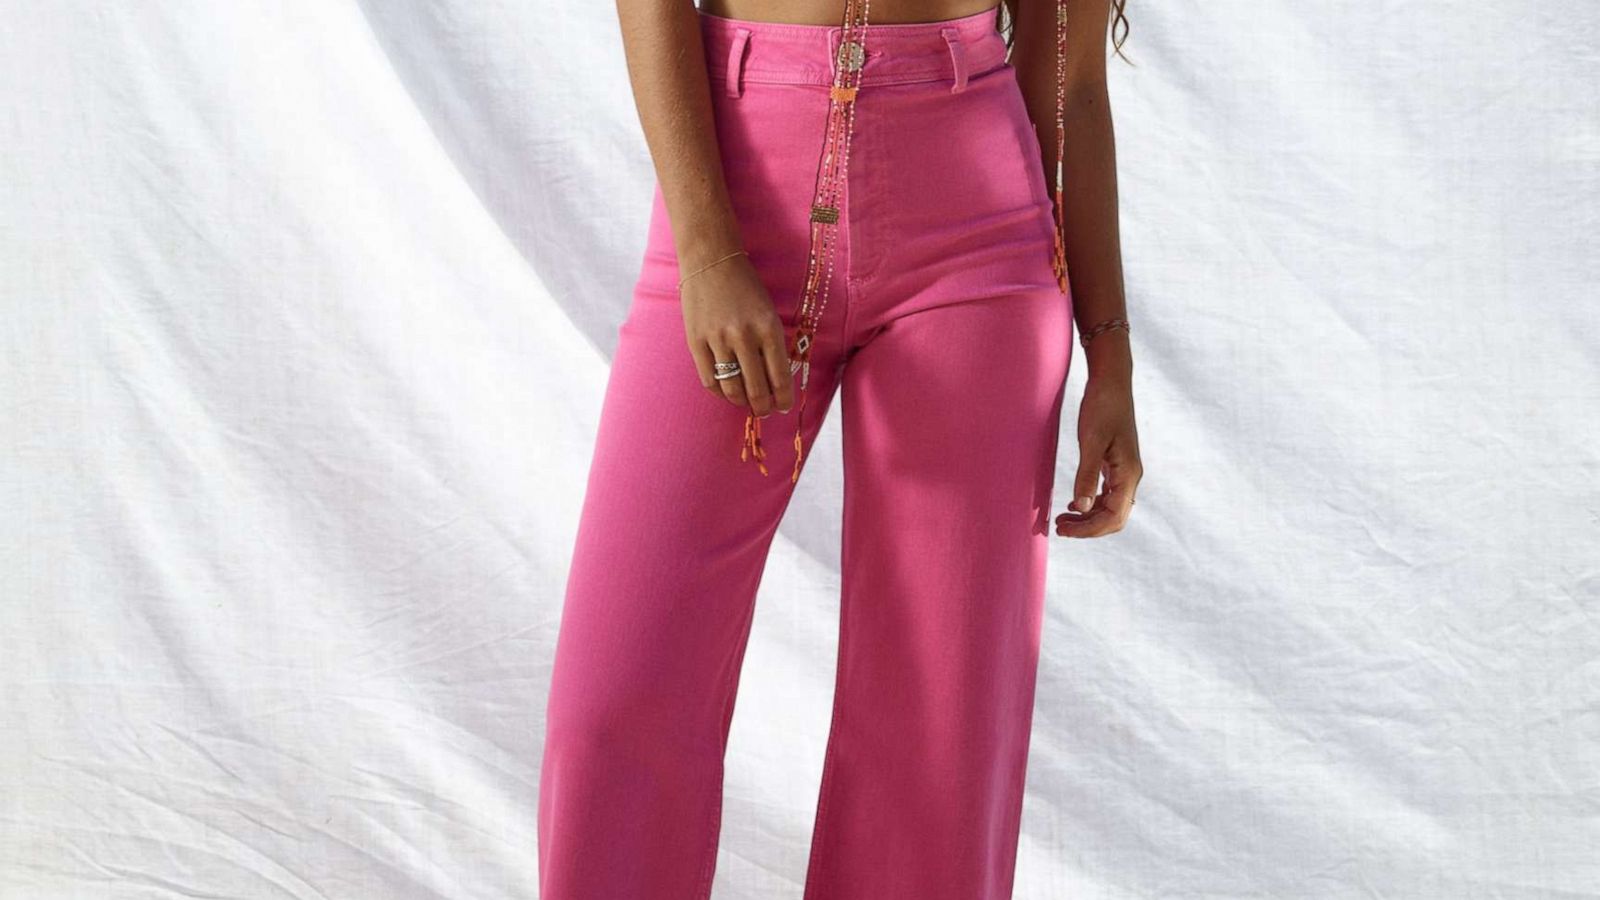 Shop the pink pants look going viral on TikTok - Good Morning America